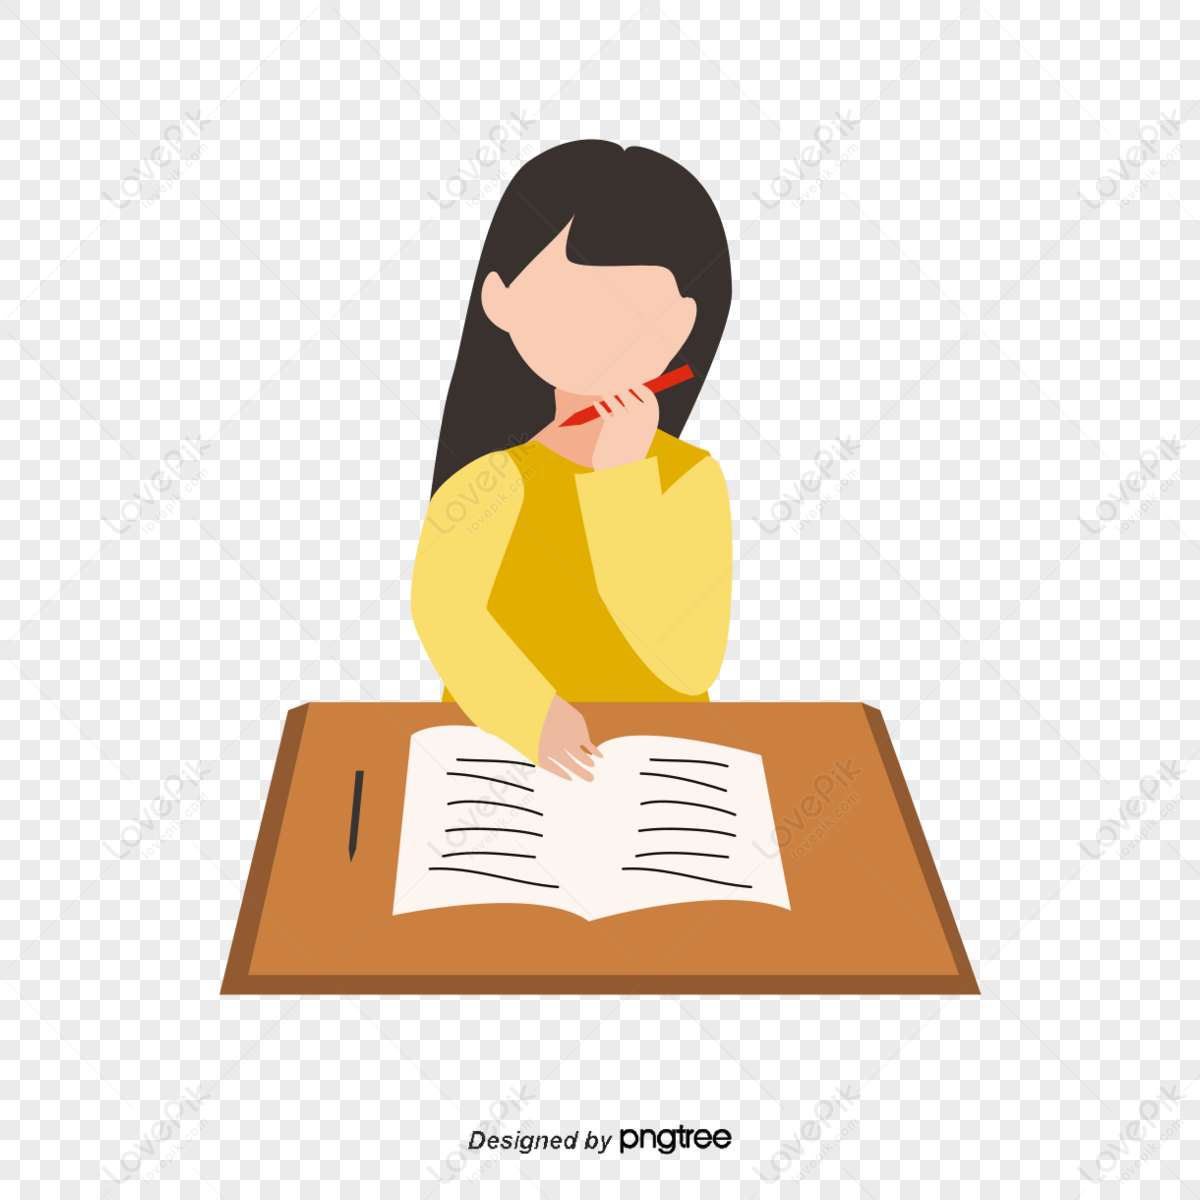 the man who did his homework,mobile learning icon,mobile learning png free download